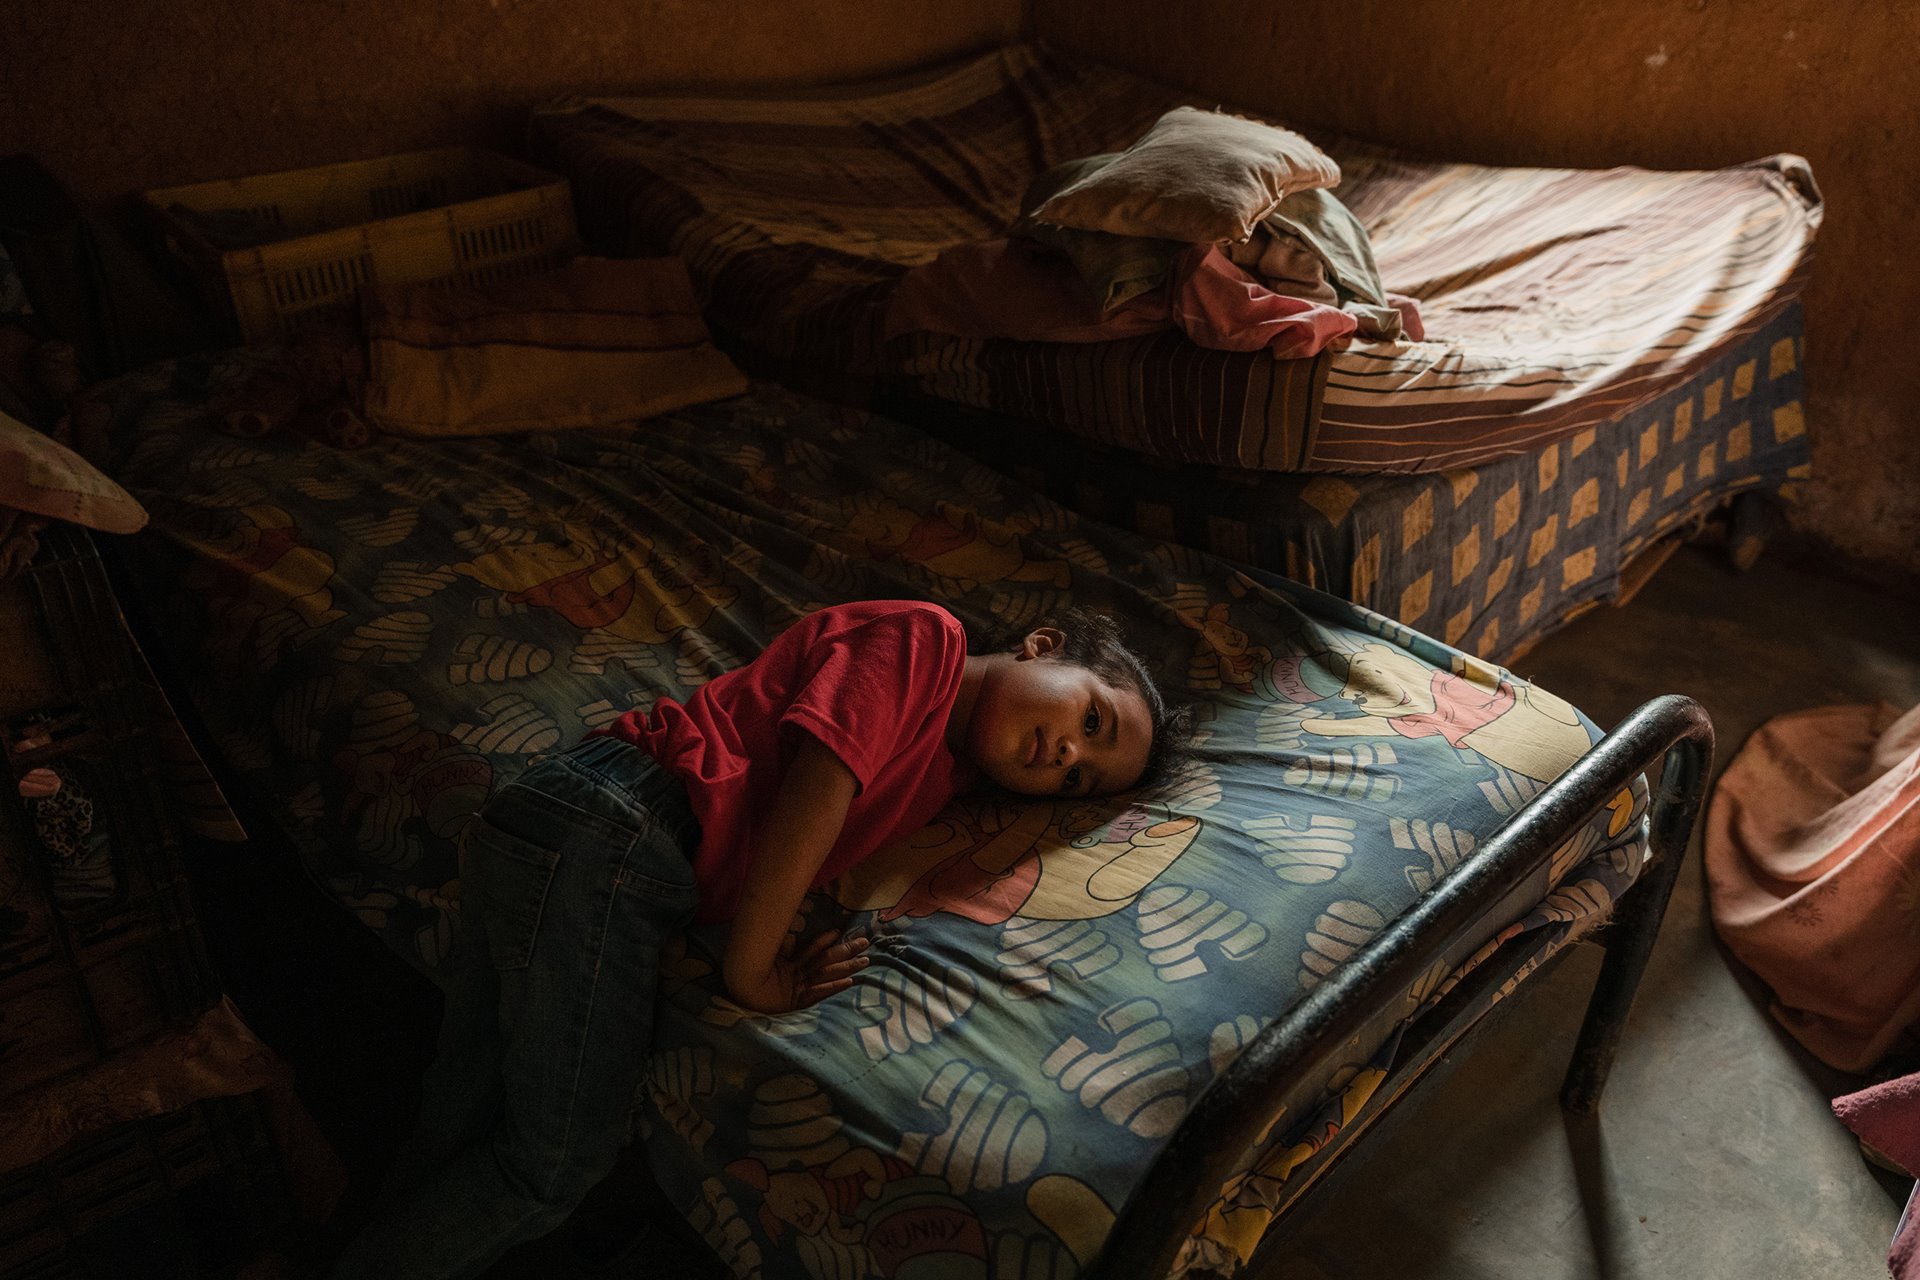 Clarelys Lopez-Jimenez (4) rests in the room she shares with her family of four, in San Diego de Los Altos, Venezuela. Her mother is a kindergarten teacher, whose US$6 monthly salary barely covers her basic needs. She plants beans and avocados to barter with her neighbors.&nbsp;<br />
&nbsp;